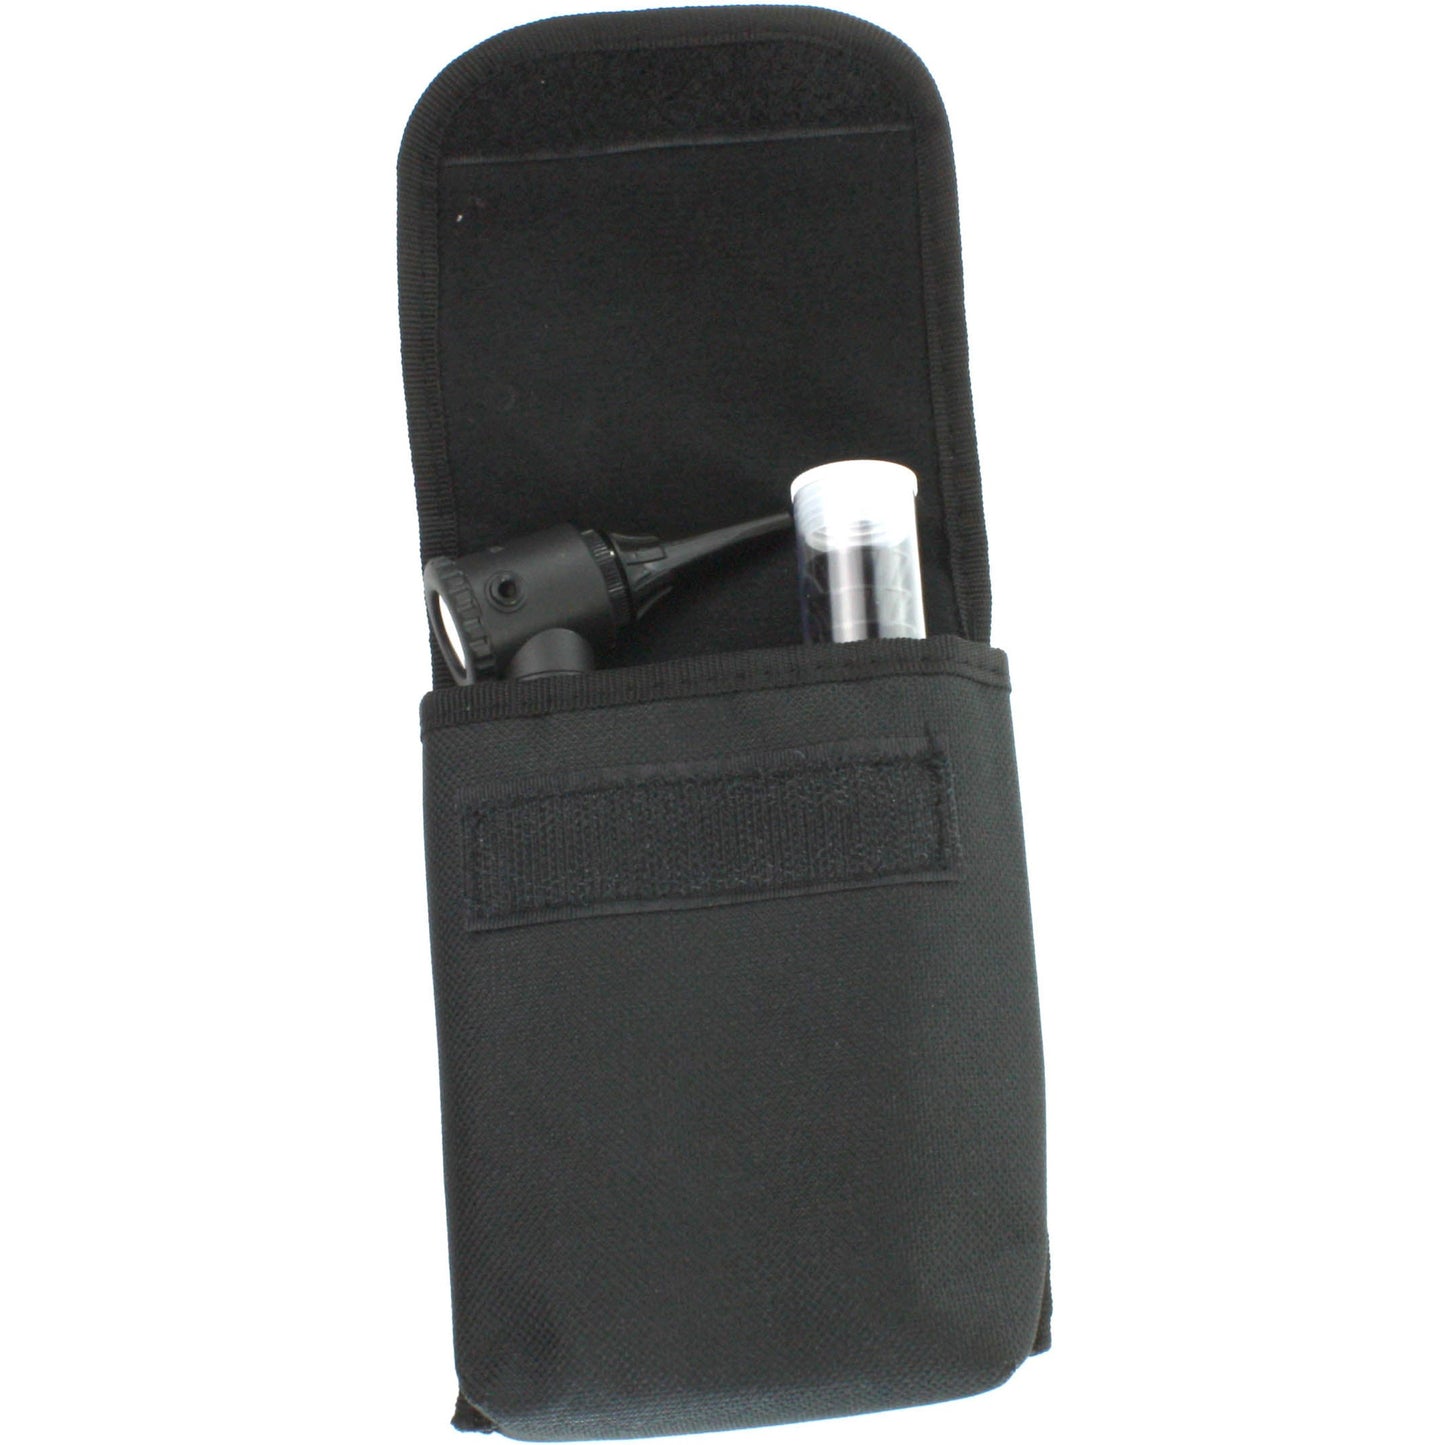 Riester Penscope Otoscope 2.7v with Pouch - Black